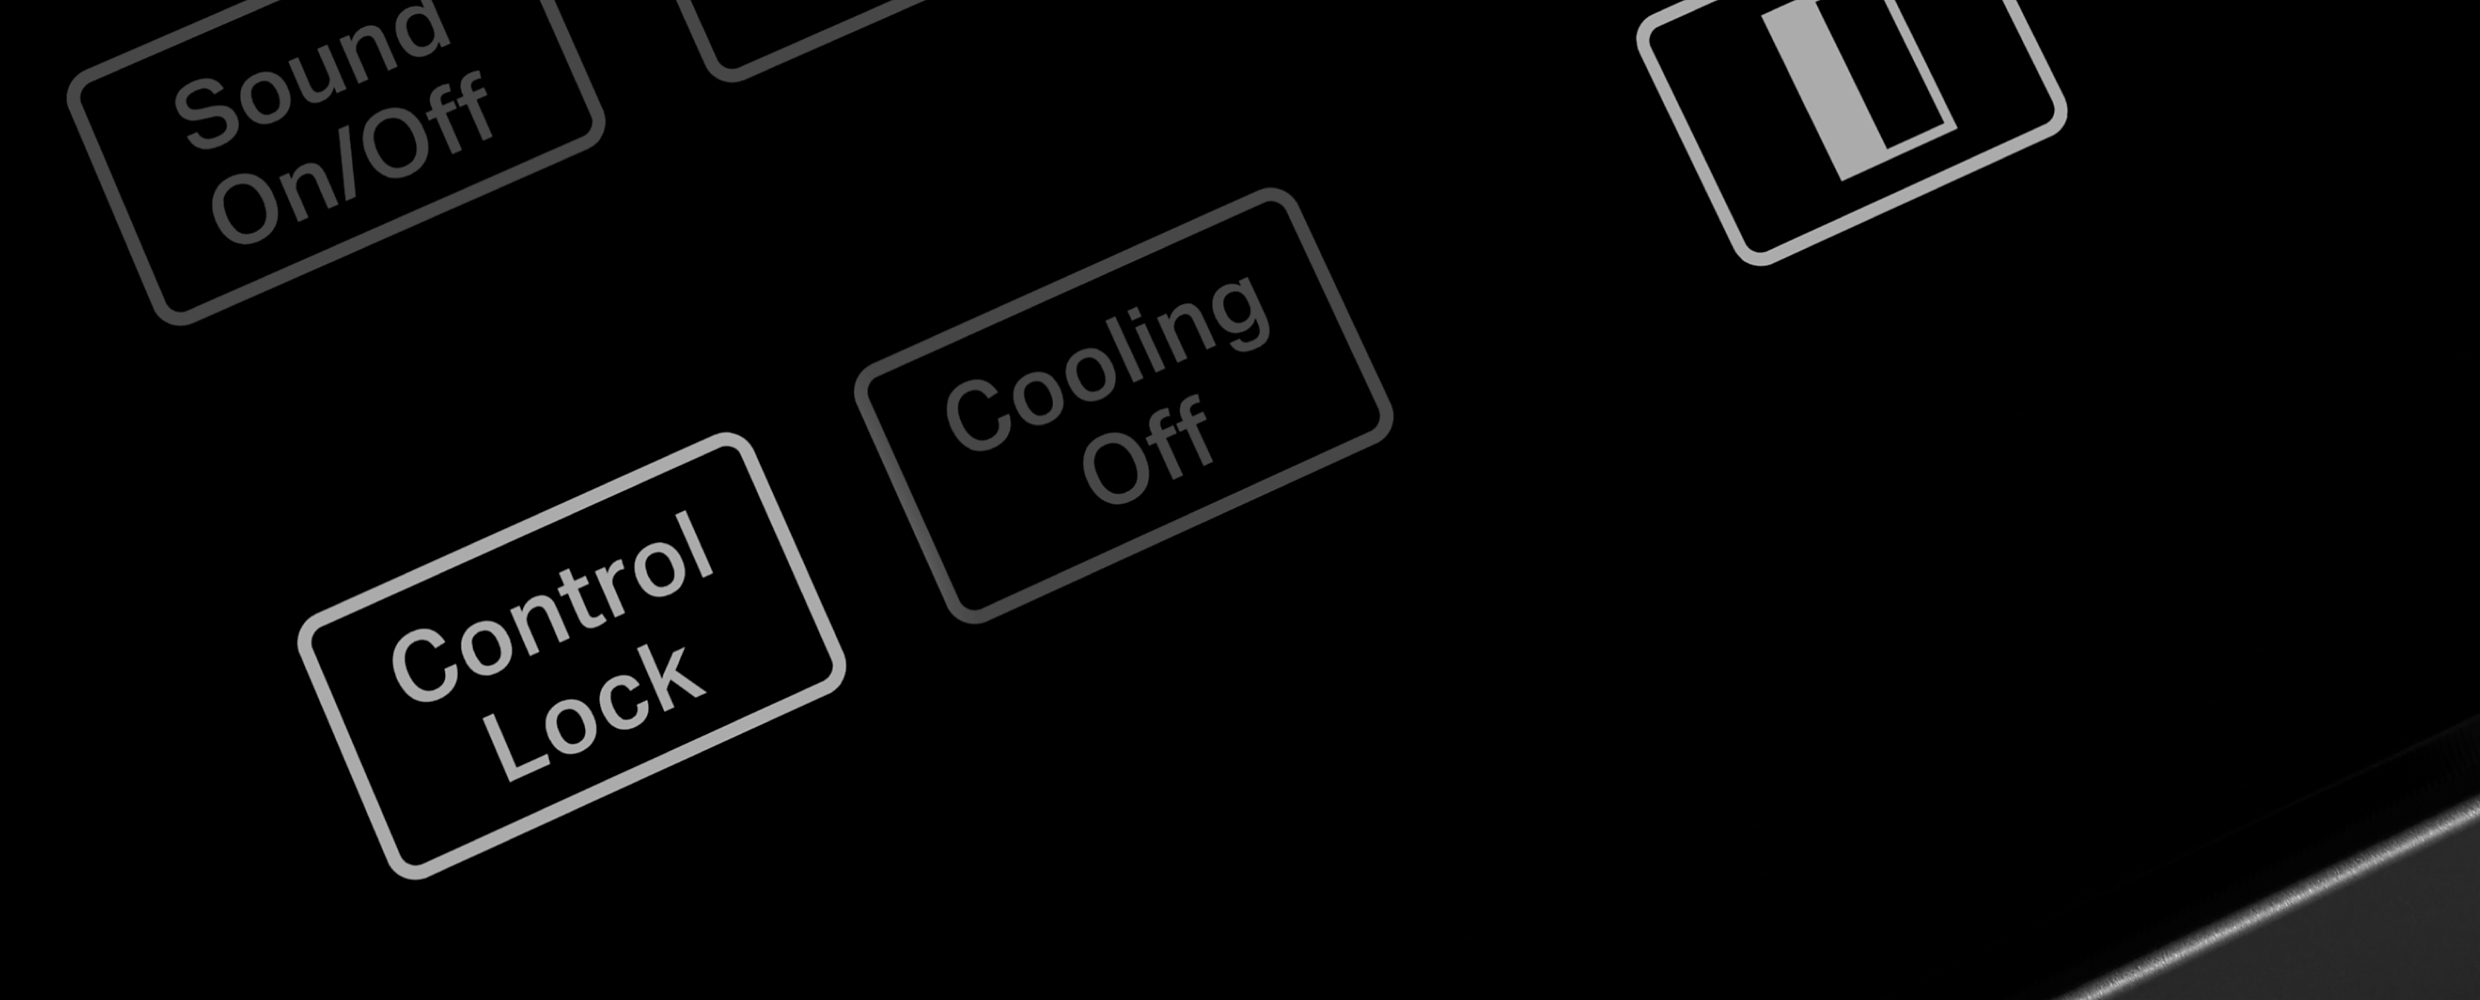 Control Lock button on Internal Touchscreen Controls of 42" KitchenAid® Built-In Side-by-Side Refrigerator